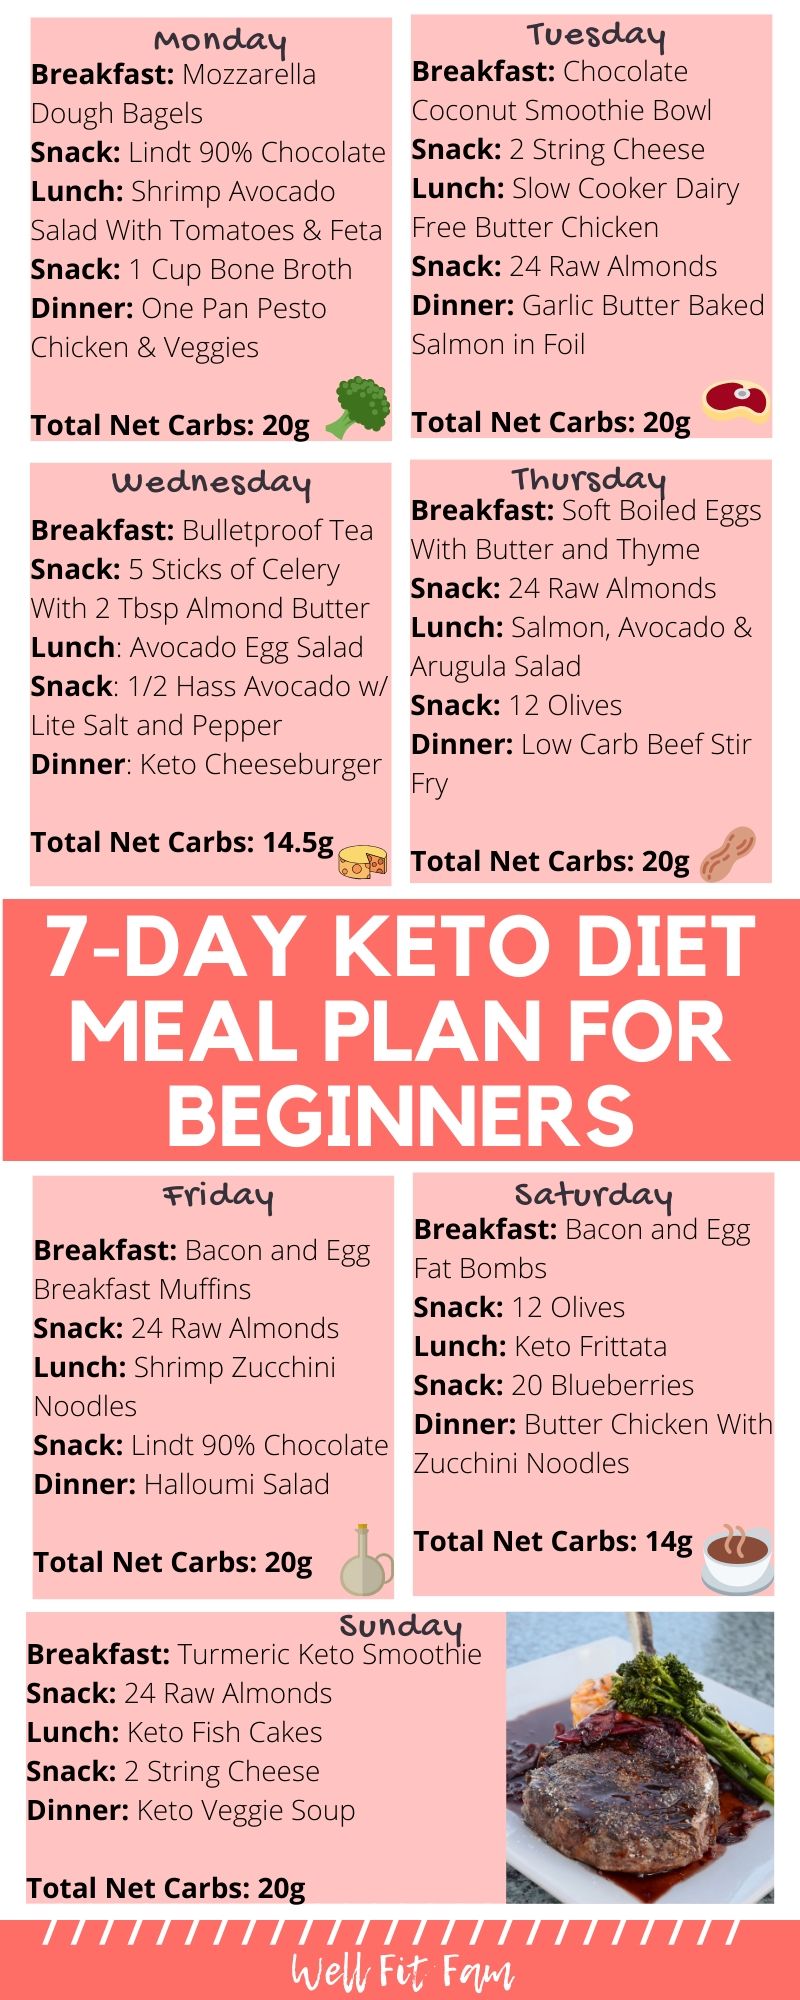 How To Make A Keto Meal Plan Without Grains And Legumes